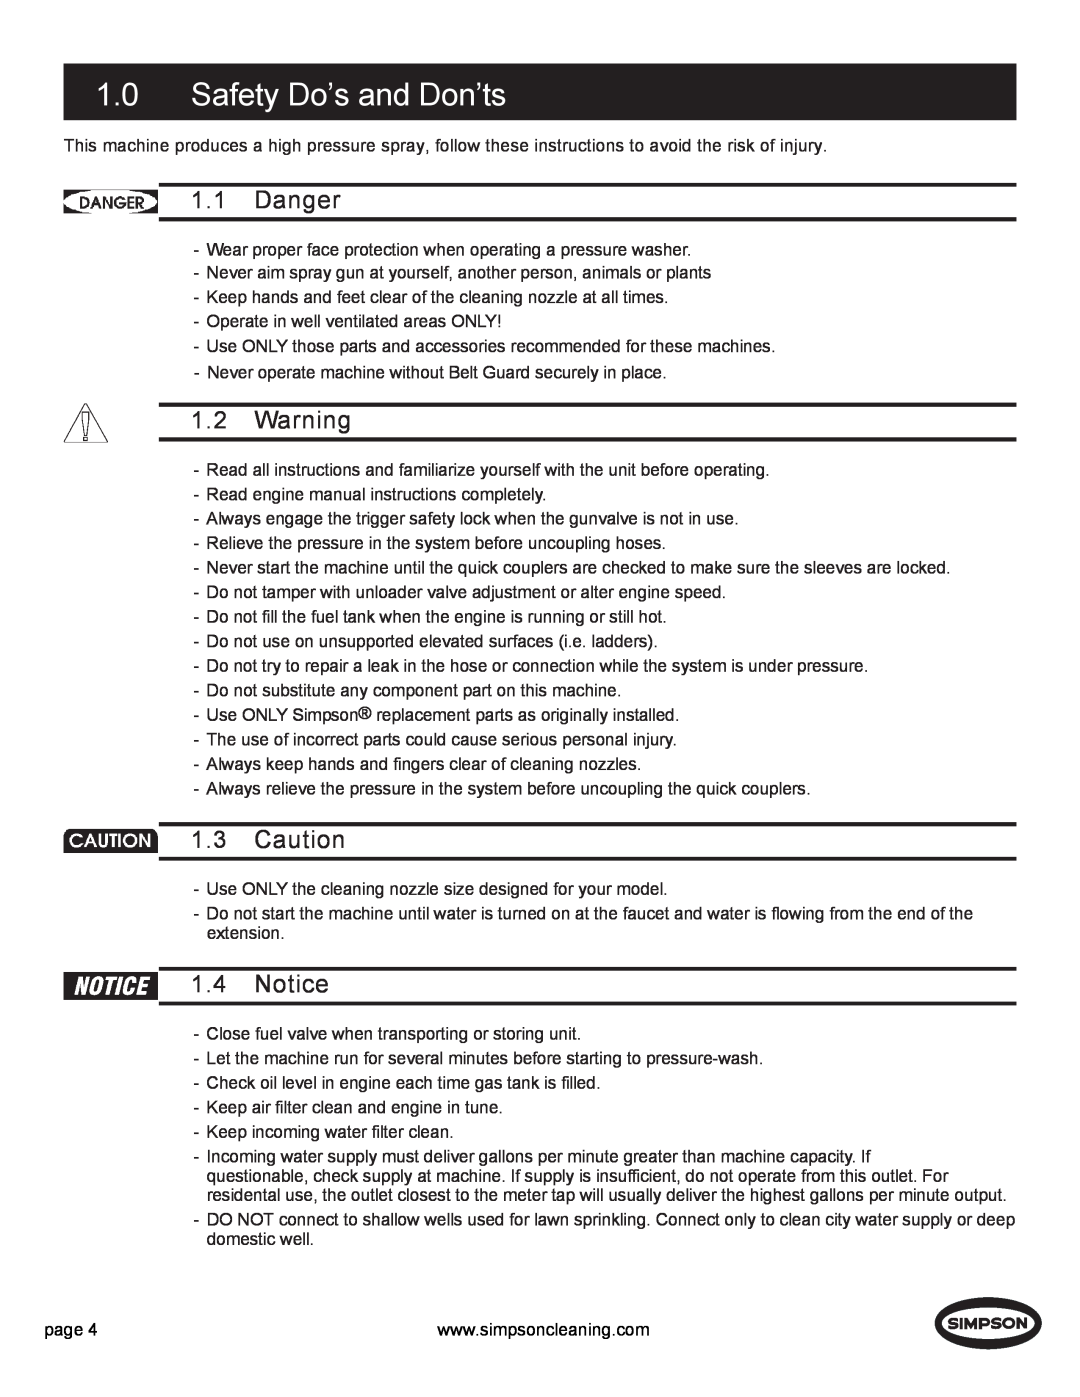 Simpson PS4240H manual 1.0Safety Do’s and Don’ts, Danger 